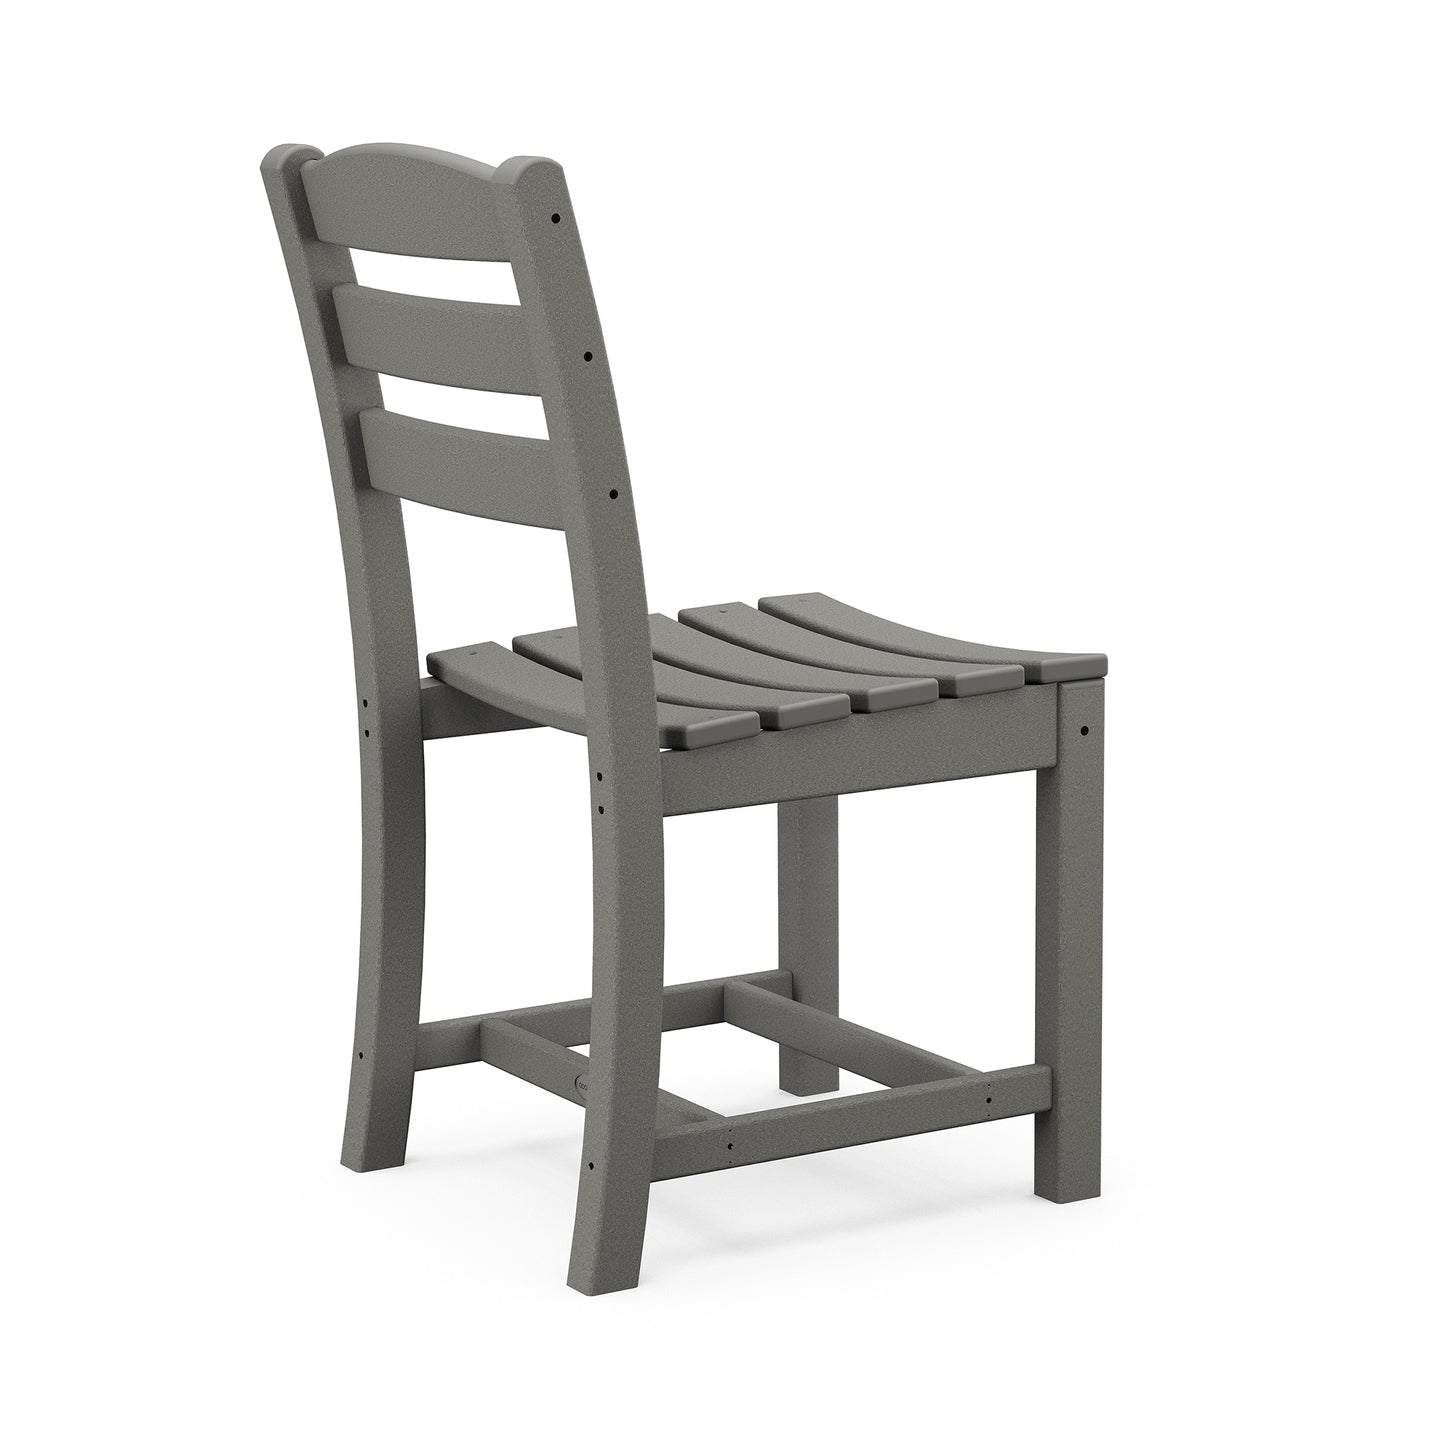 A gray POLYWOOD® La Casa Cafe Outdoor Dining Side Chair with a high back and slatted design, viewed from the side, set against a white background.